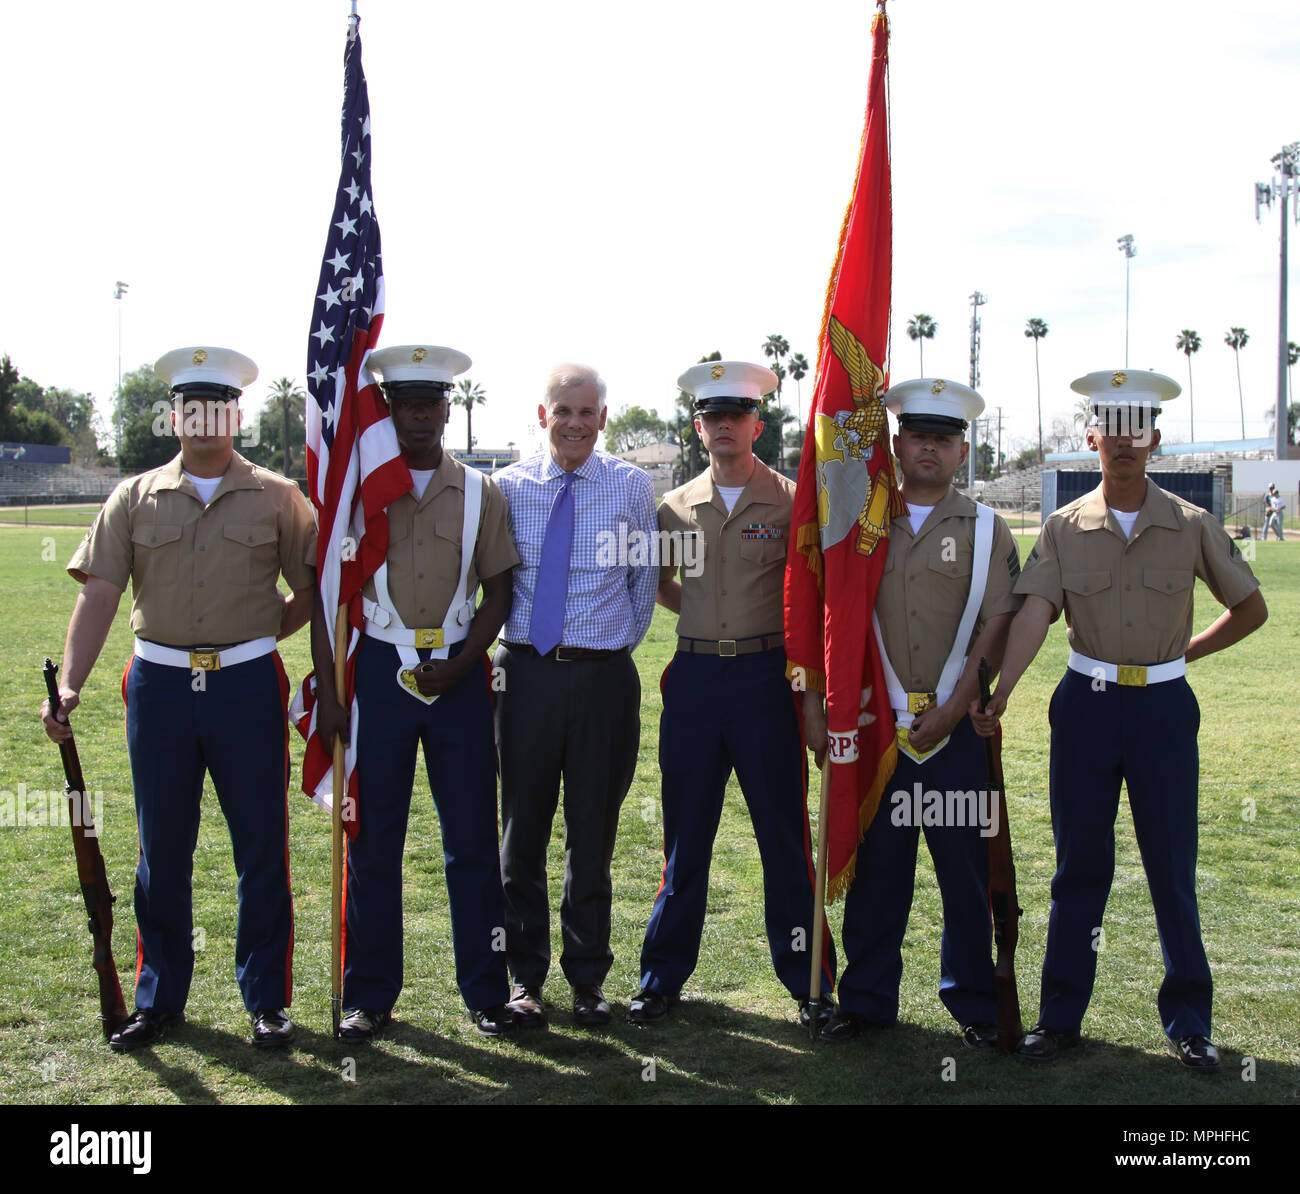 Left to right, Marine Corps Recruiters Sgt. Elijah Gable, Sgt. Derrick Berrian, Mr. Dennis Mulhaupt, president of St. John Bosco High School, SSgt. Phillip Page, Sgt. Victor Romualdo and LCpl. Ulixes Hernandez, pose during a varsity baseball game at St. John Bosco High School, Bellflower, Calif., March 14, 2017. Coming from Recruiting Substation Lakewood, the recruiters were the official color guard for the game. Stock Photo